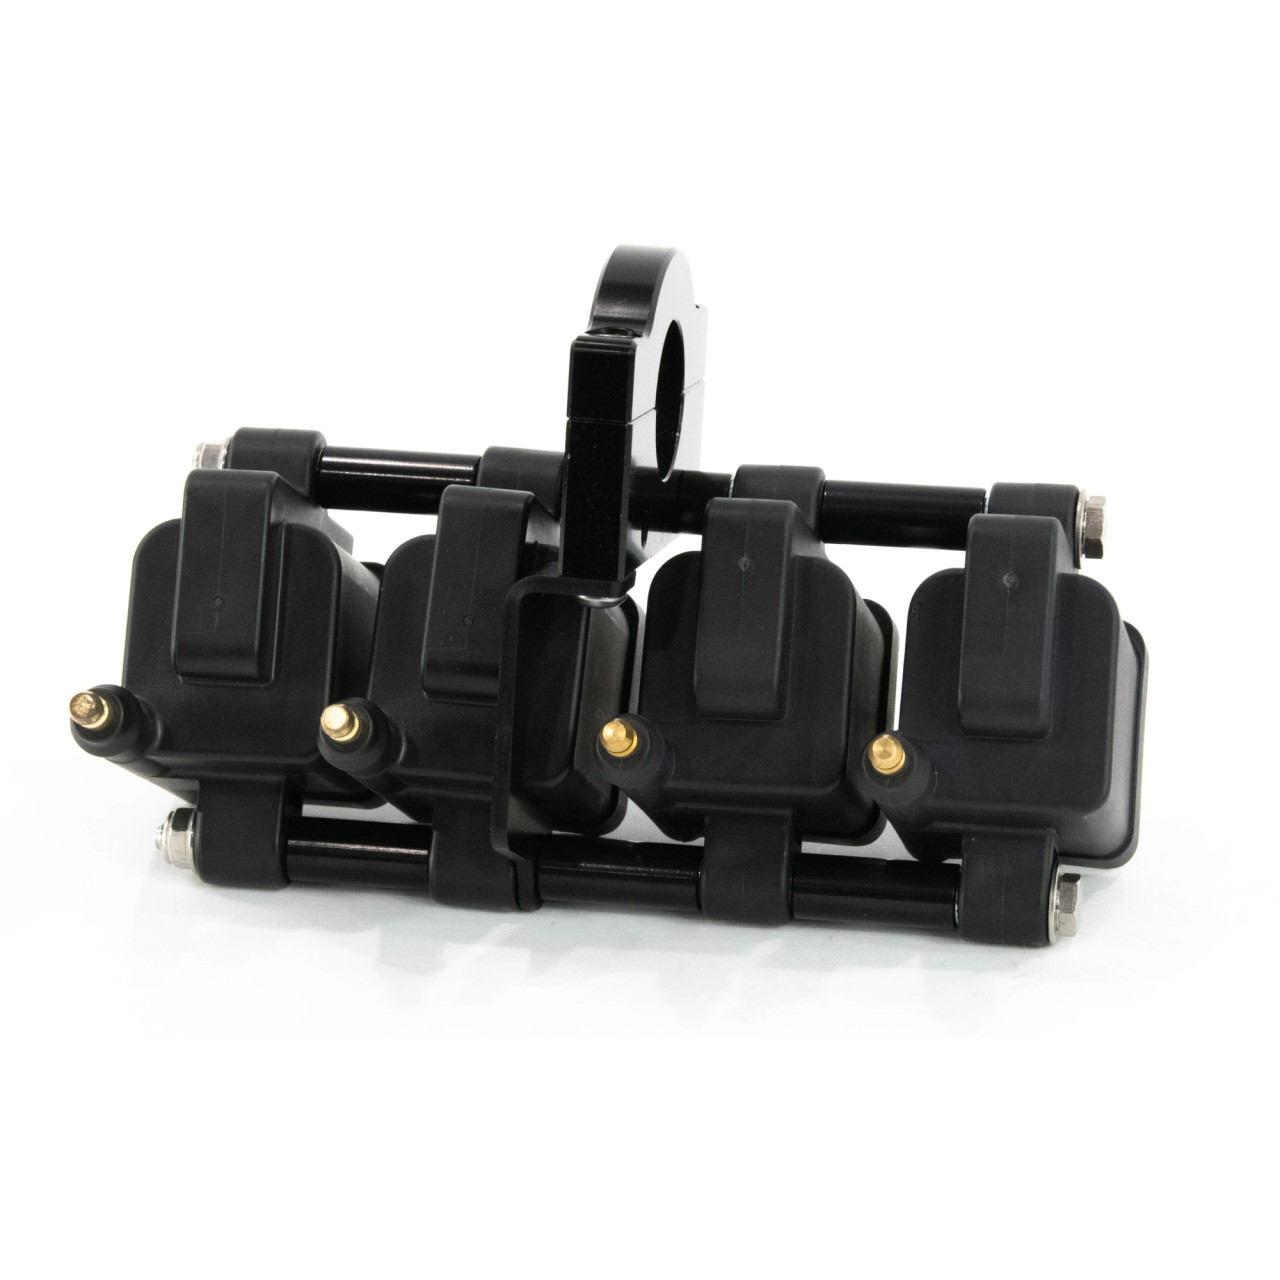 Rollbar Mount IGN1A Ignition Smart Coil Brackets 1.625" 1 5/8 Tube (Pair)